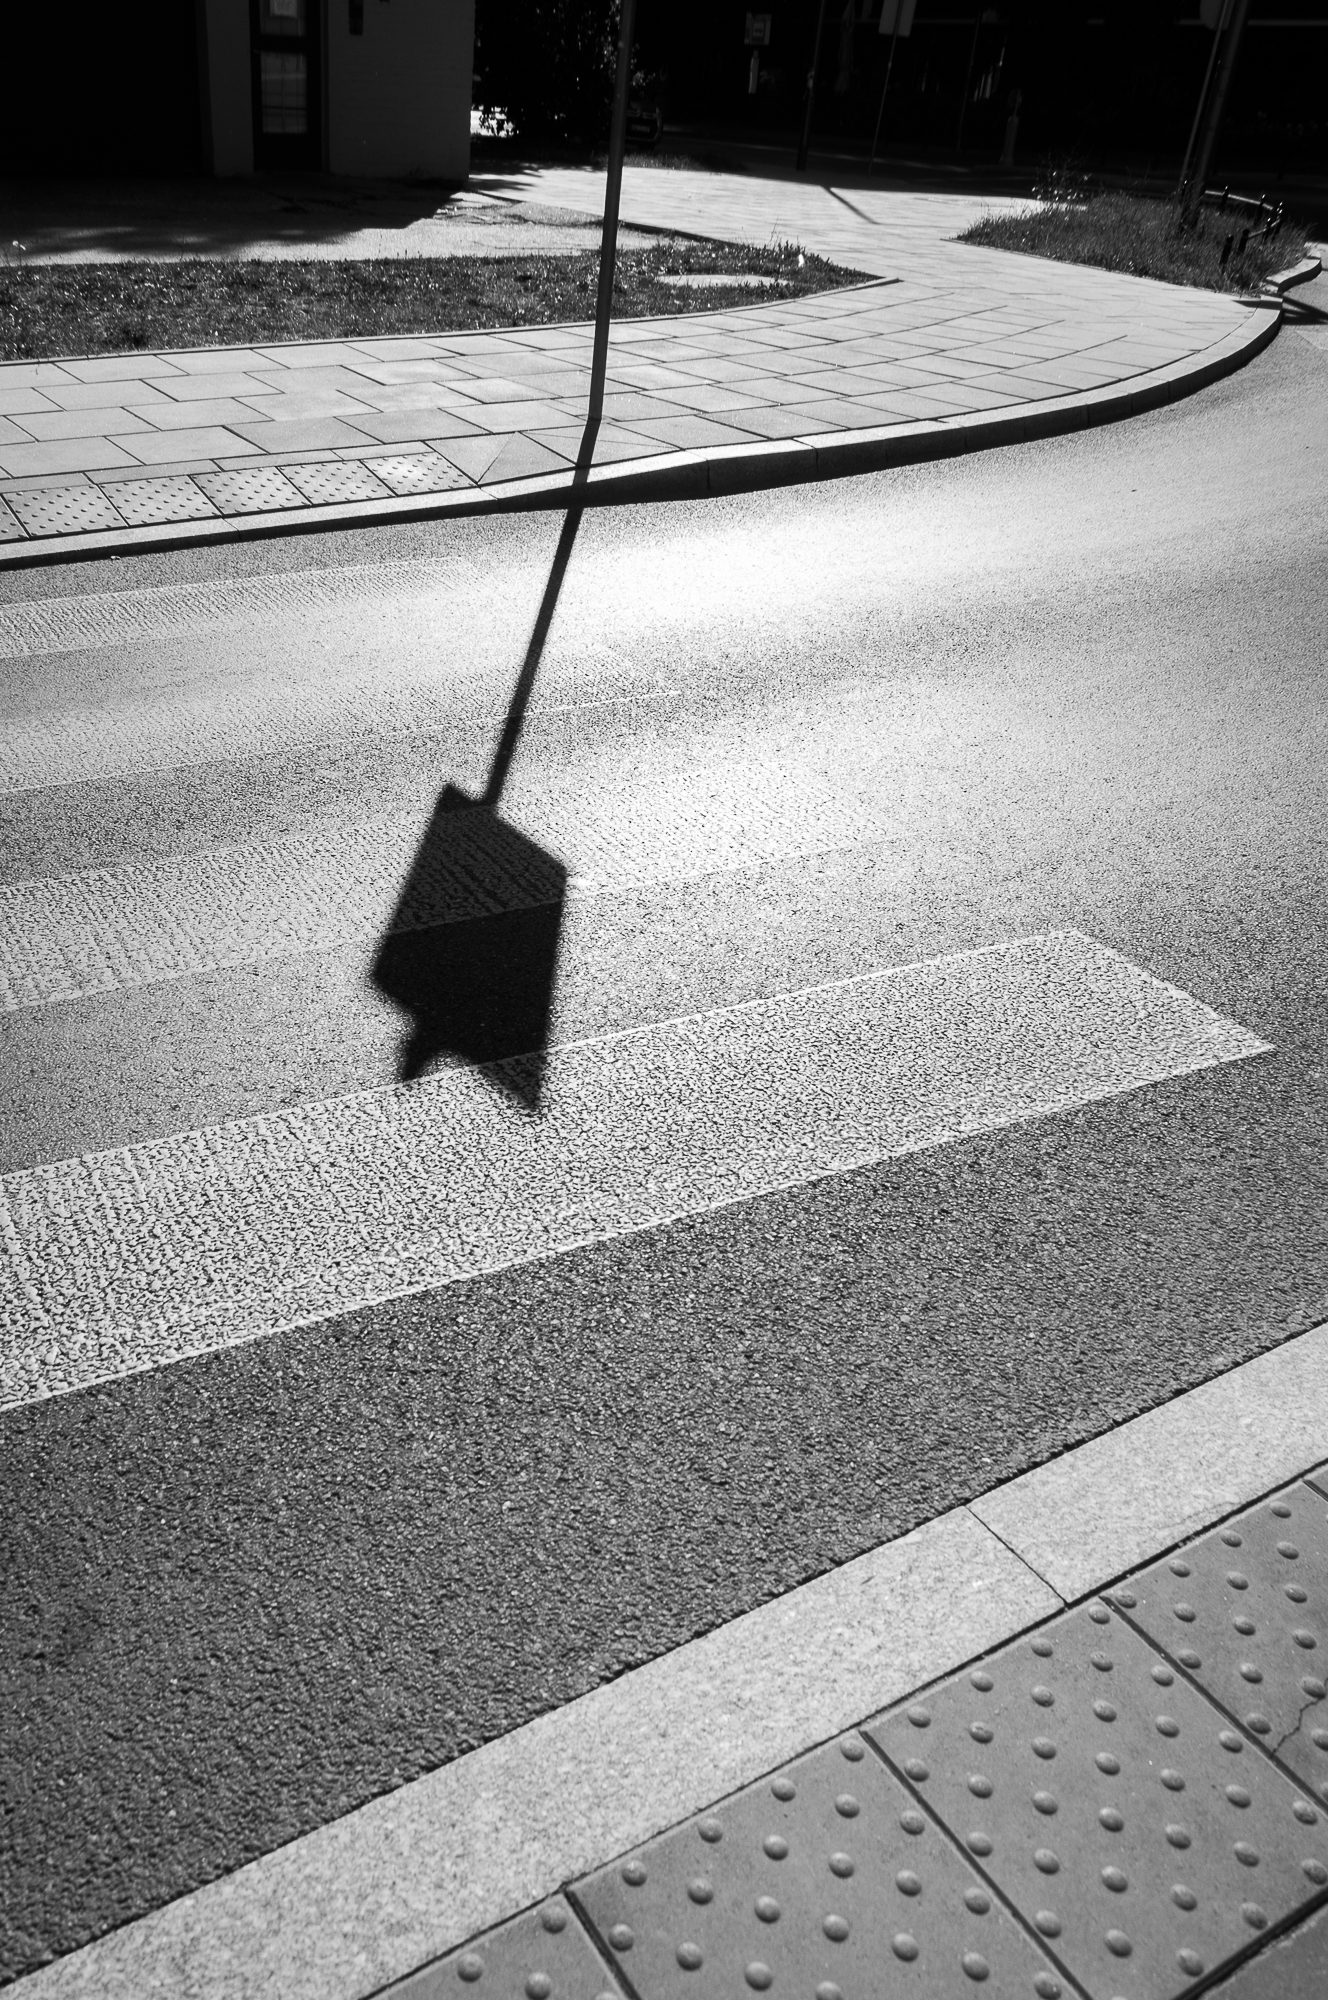 Adam Mazek Photography 2022. Warsaw Street Photography. Post: "Modern history with an admixture of ancient history." Minimalism.